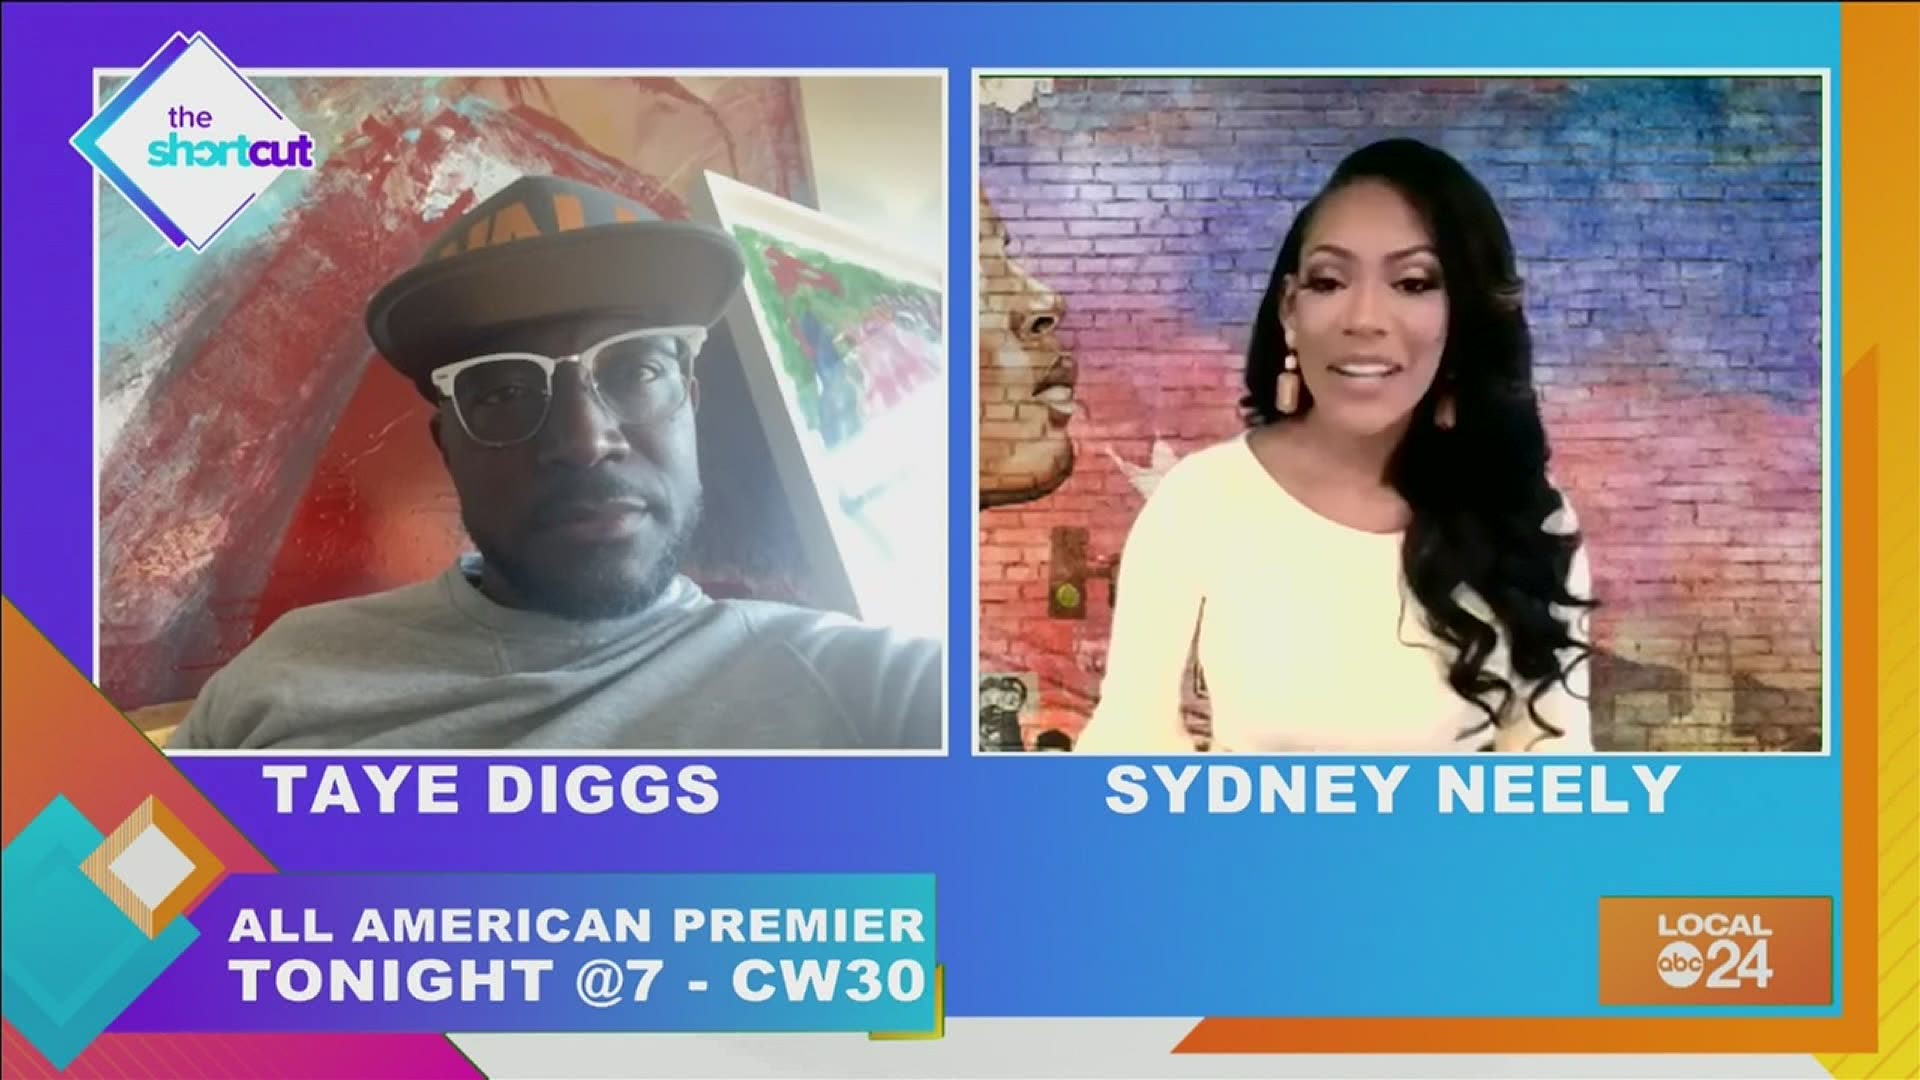 Check out this interview with Taye Diggs and Sydney Neely on The Shortcut.